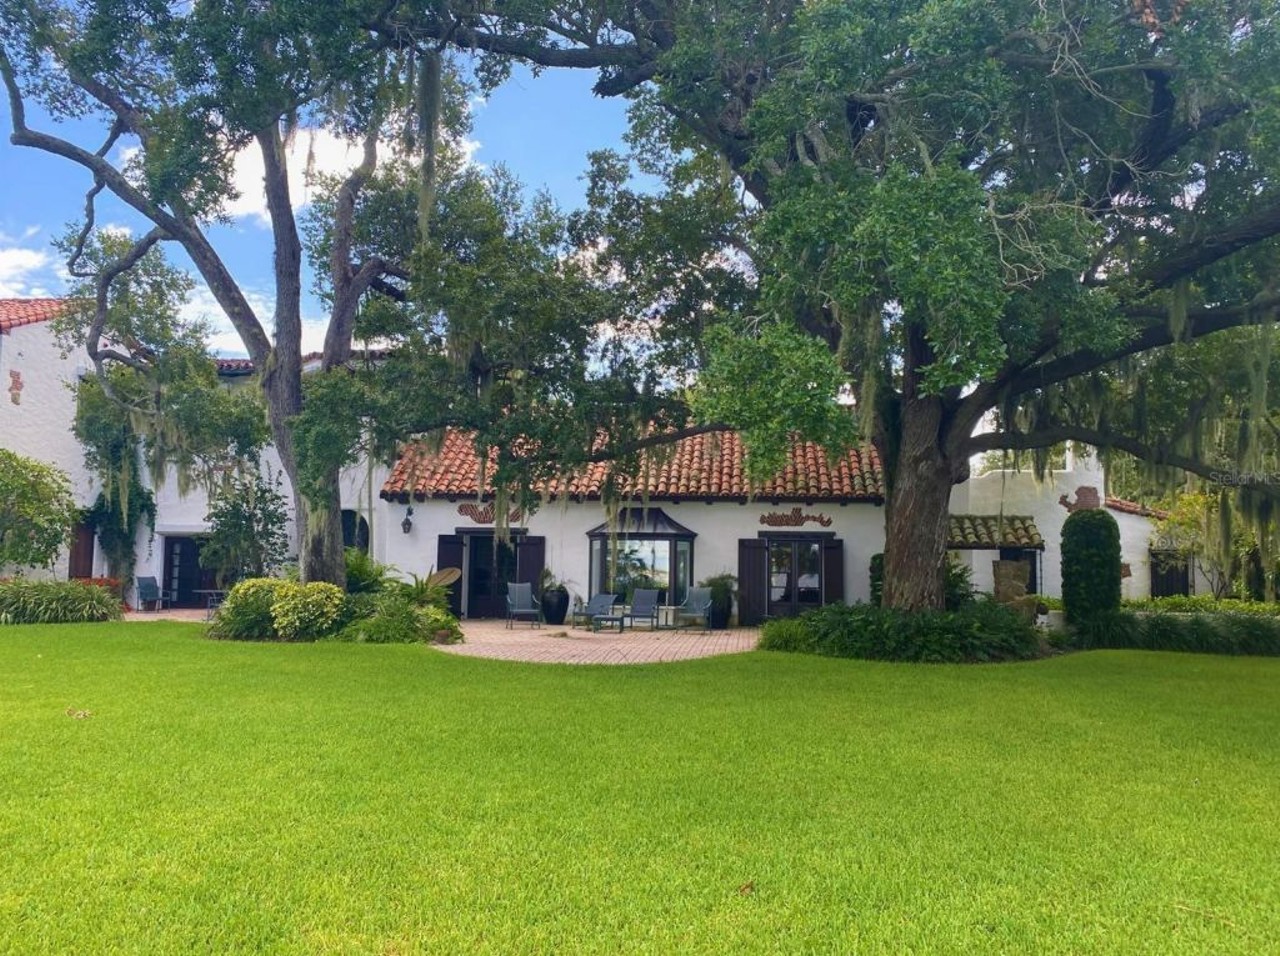 This perfect recreation of an Italian villa on the Indian River is on the market for $11 million